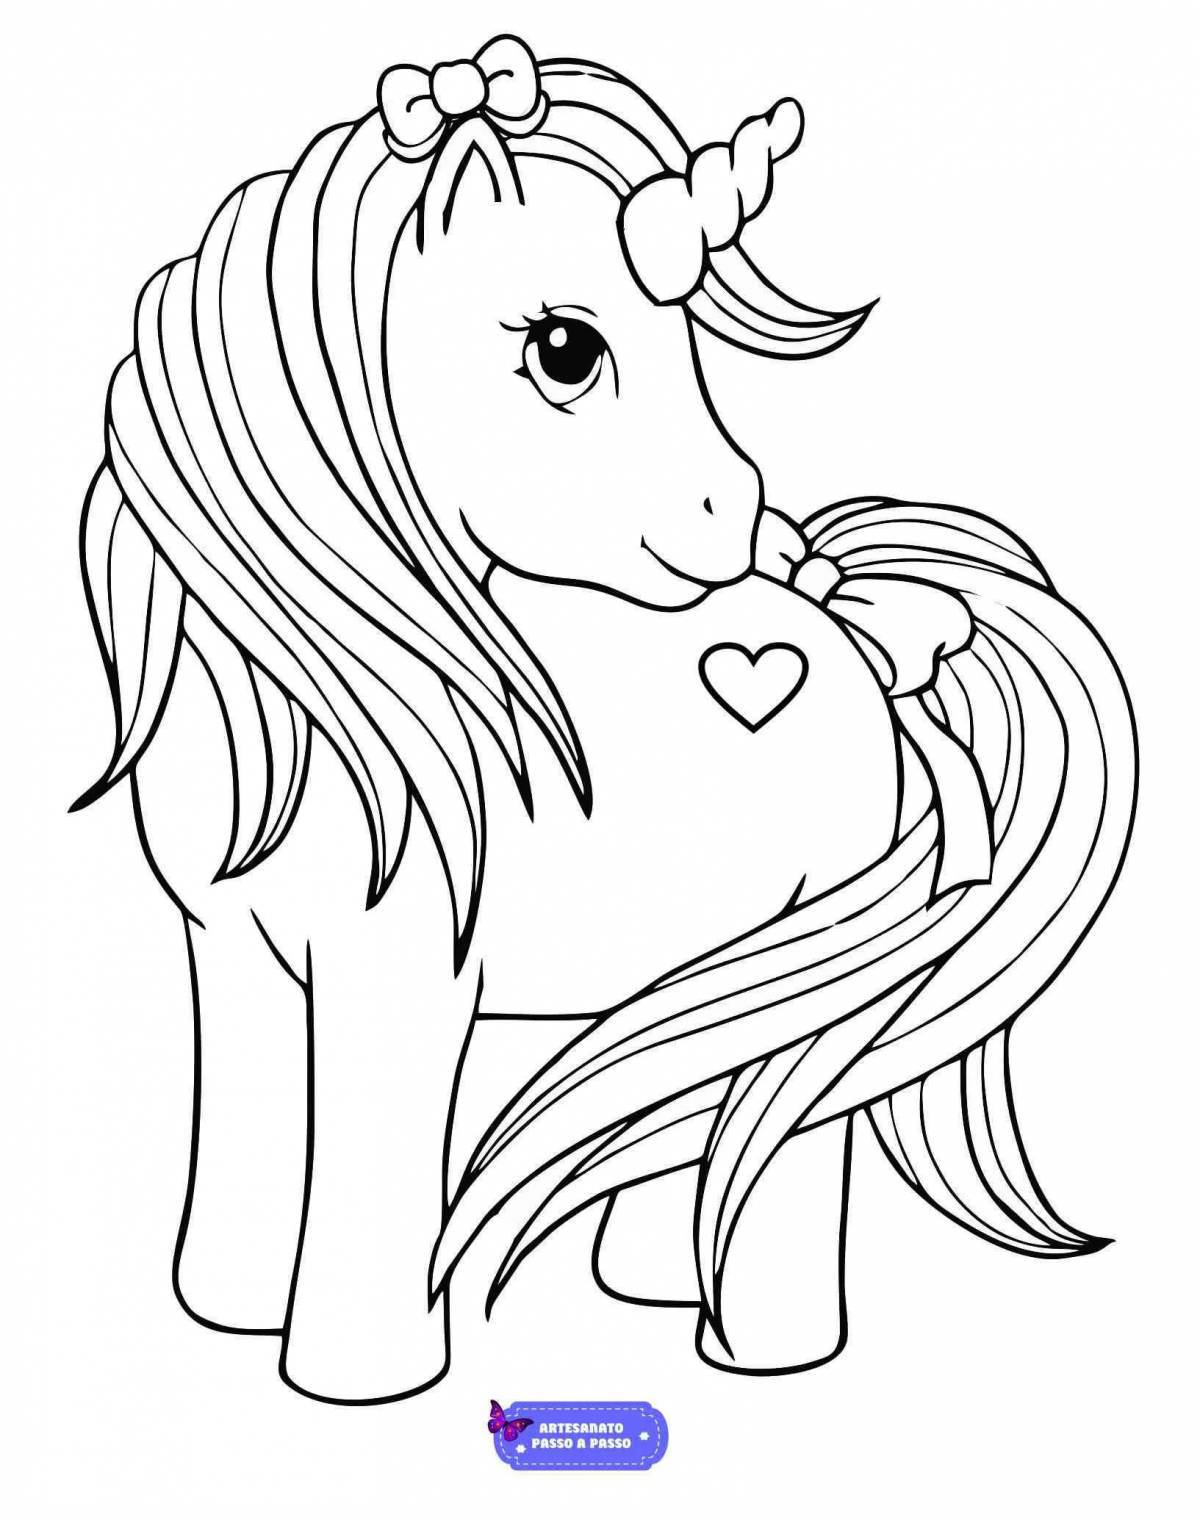 Fancy unicorn coloring book for kids 6-7 years old